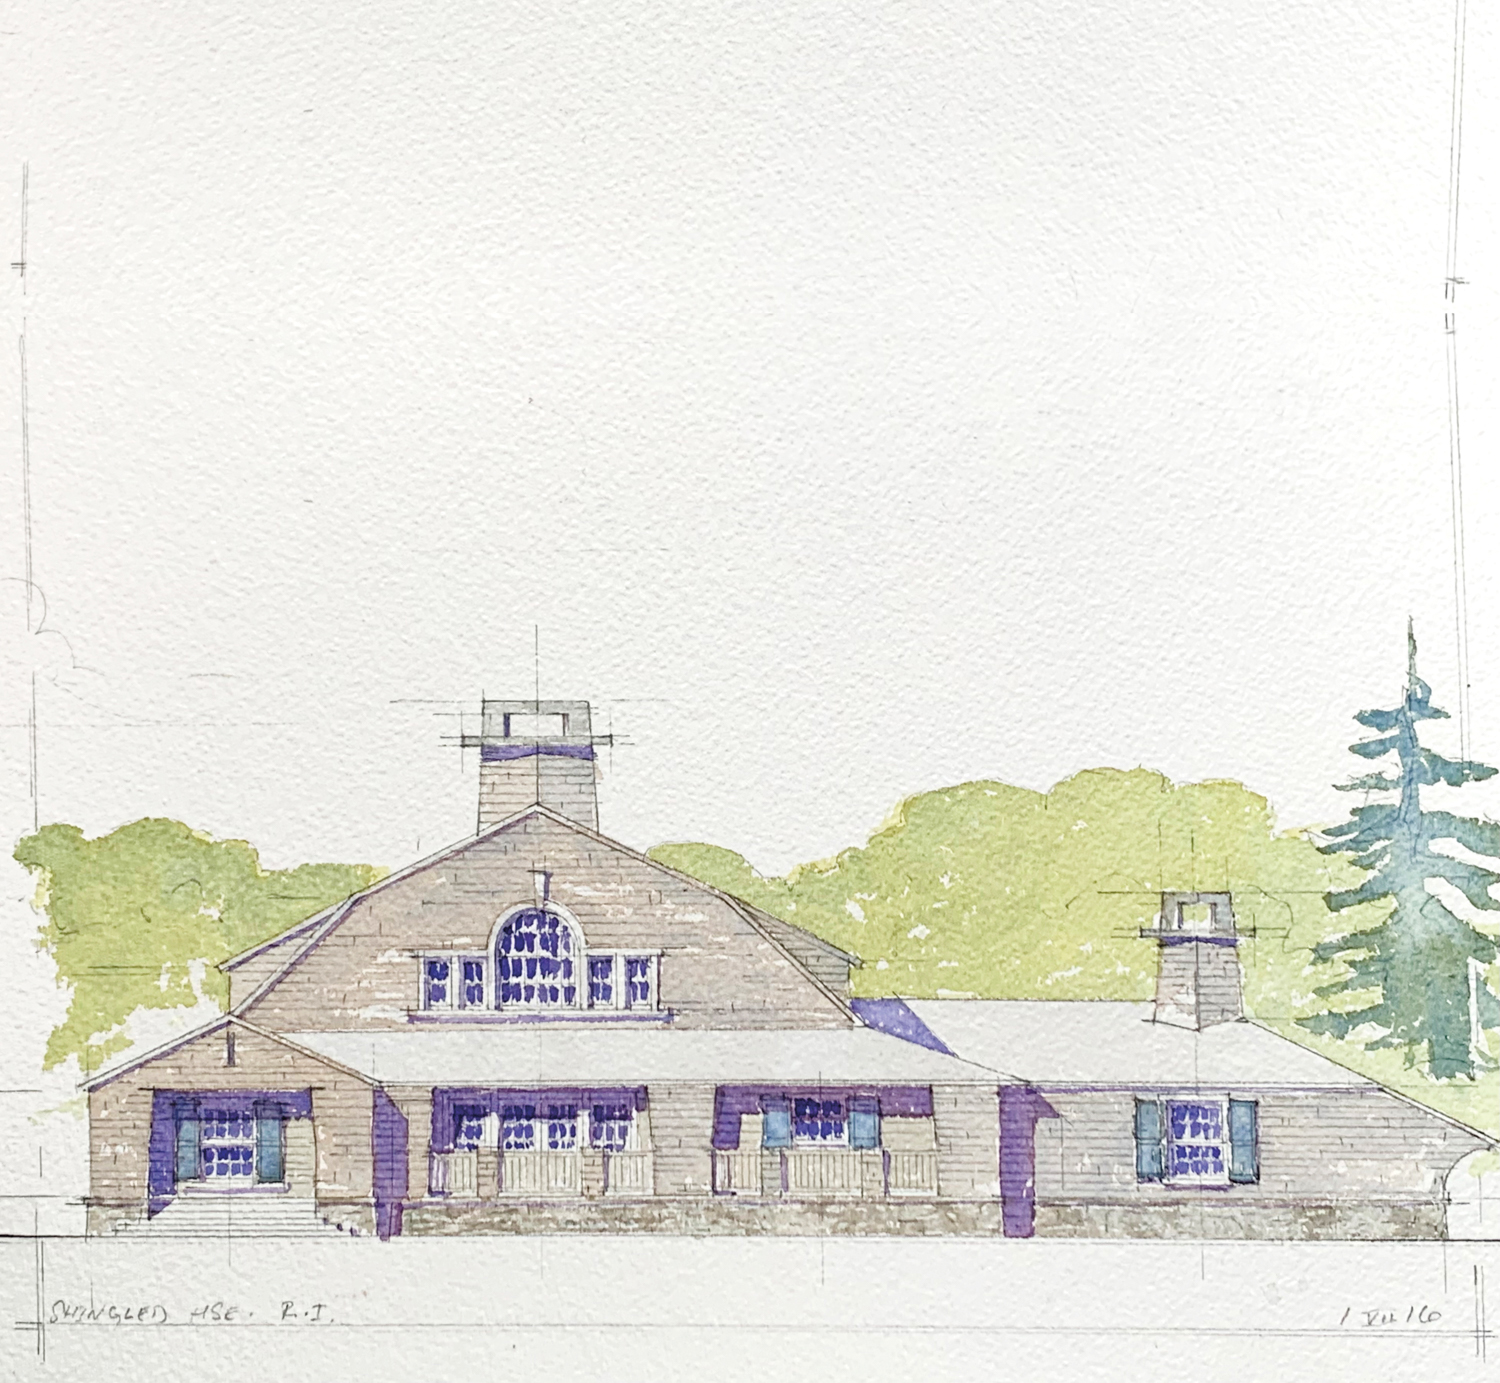 A Love Letter To Shingle Style Homes, By Architect Thomas Kligerman